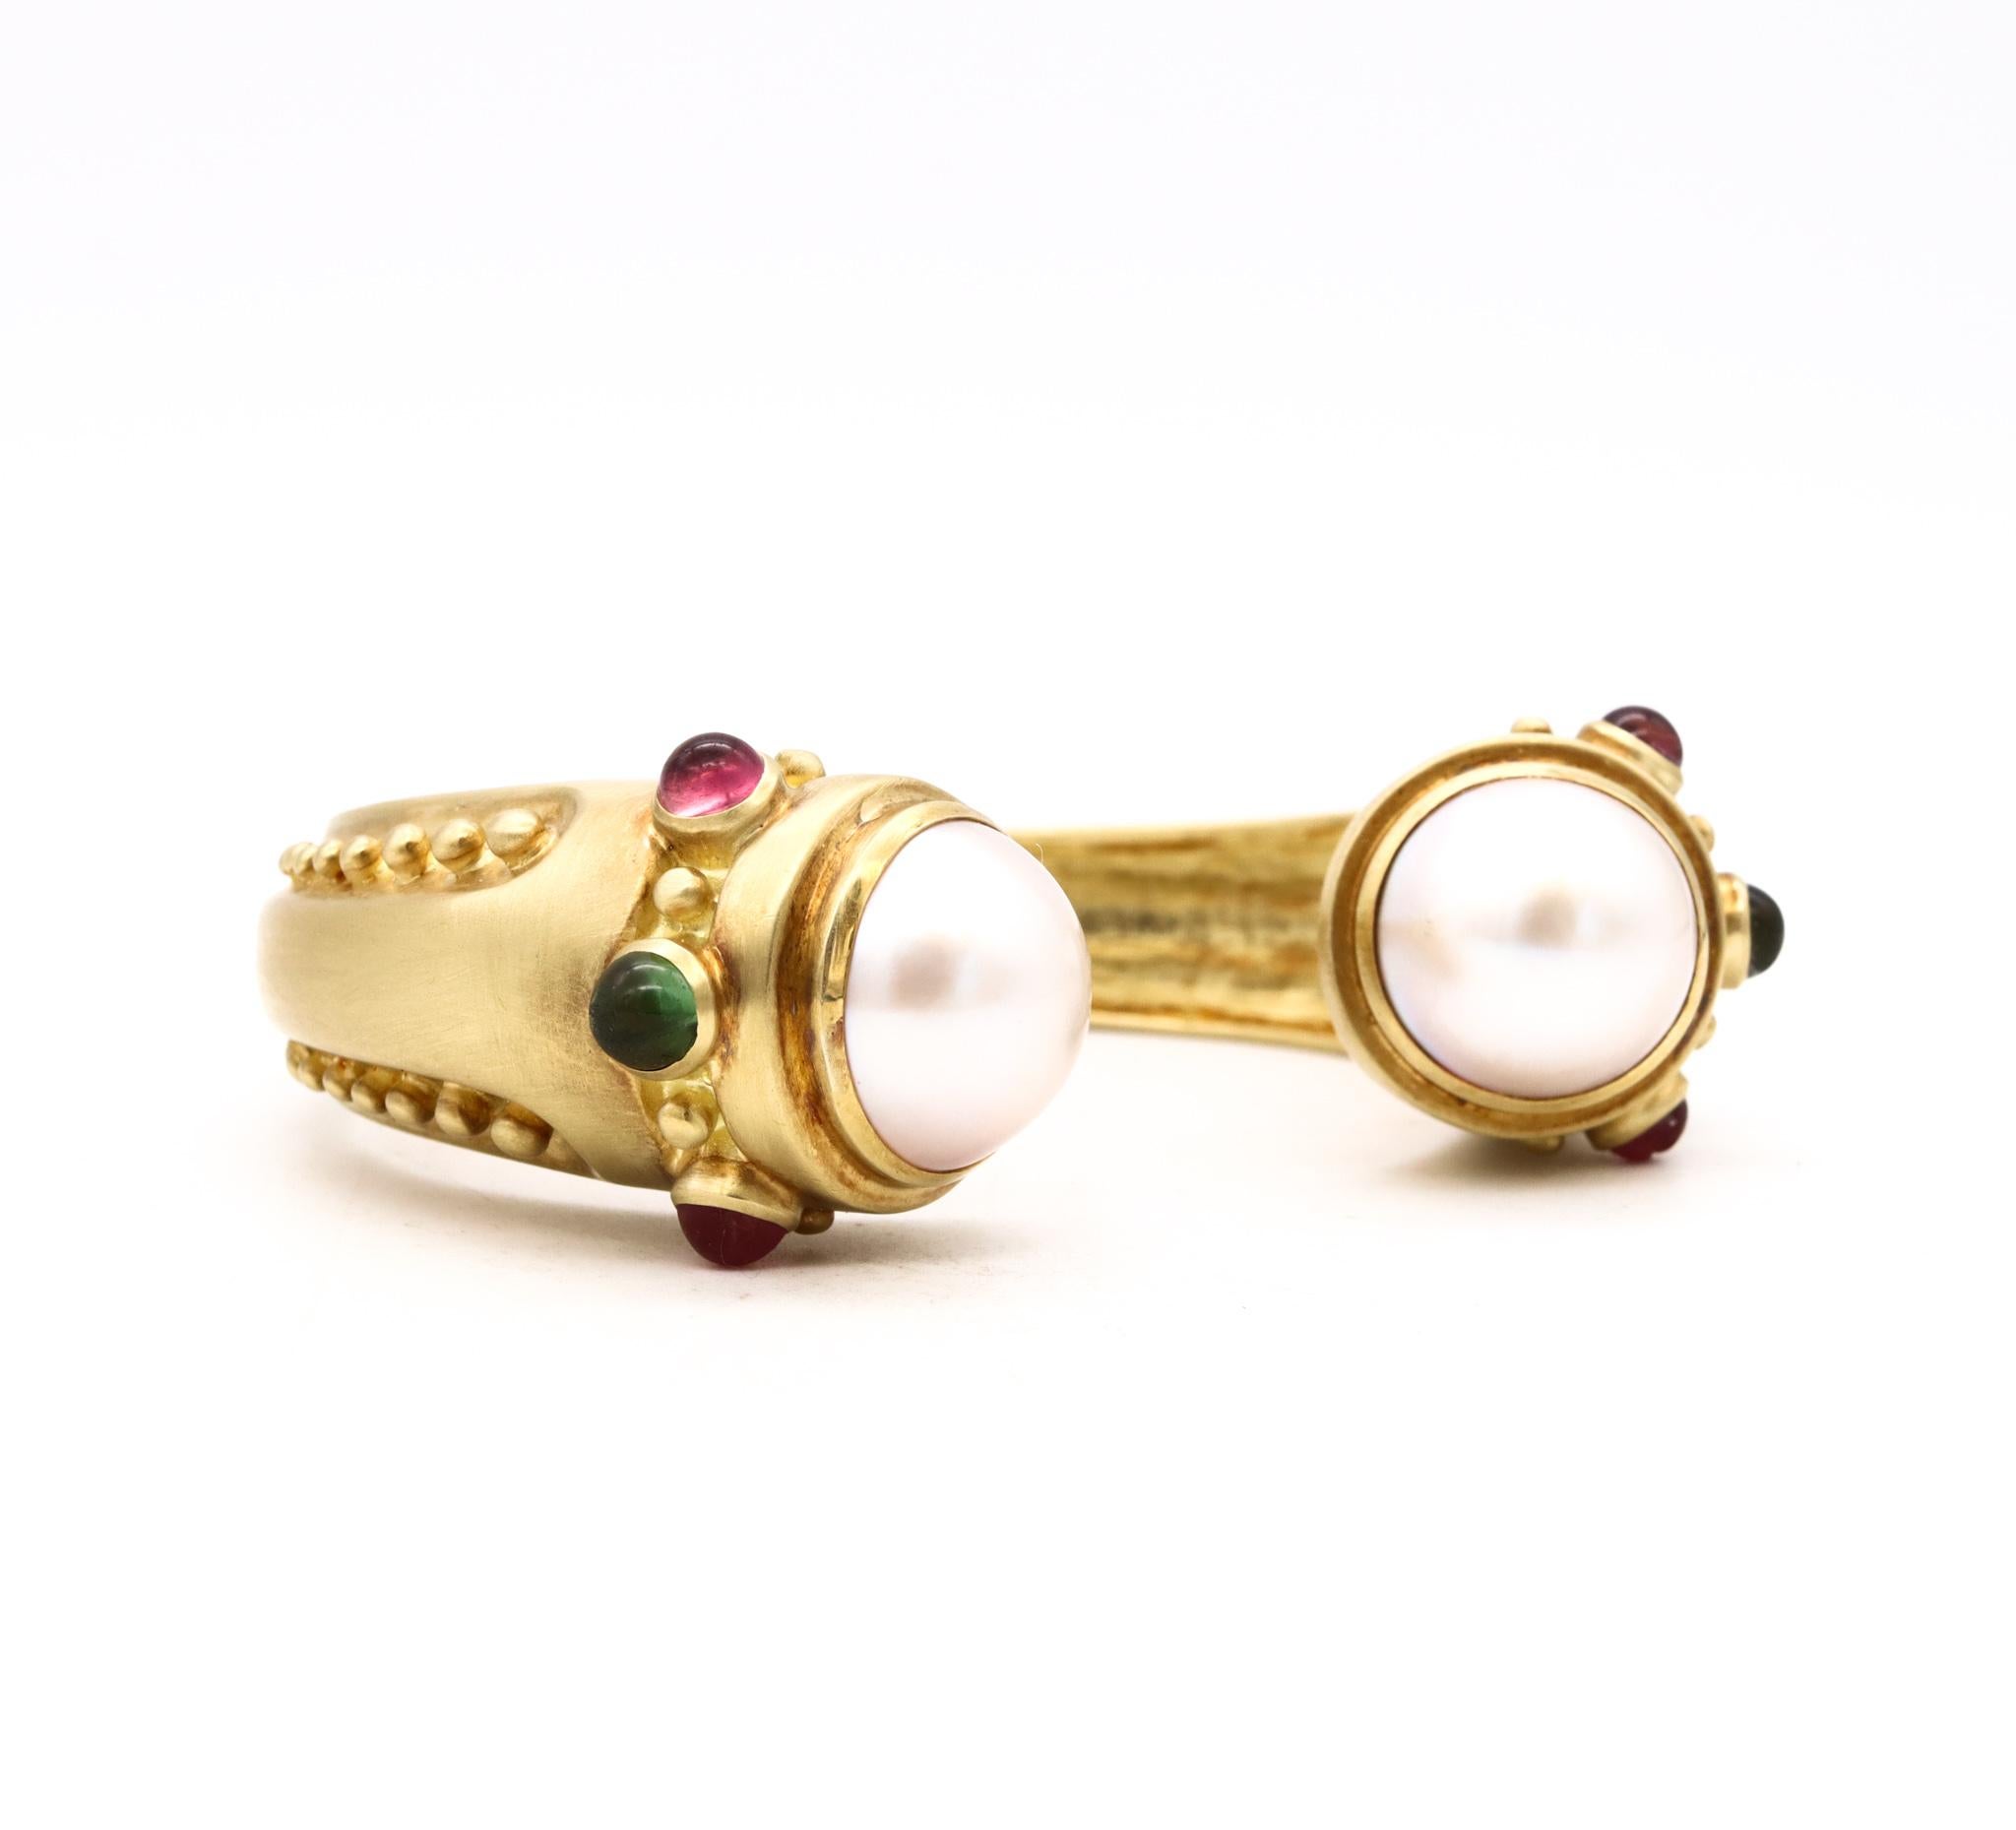 Marlene Stowe Cuff Bracelet in 18Kt Brushed Gold with Mabe Pearls and Tourmaline For Sale 3